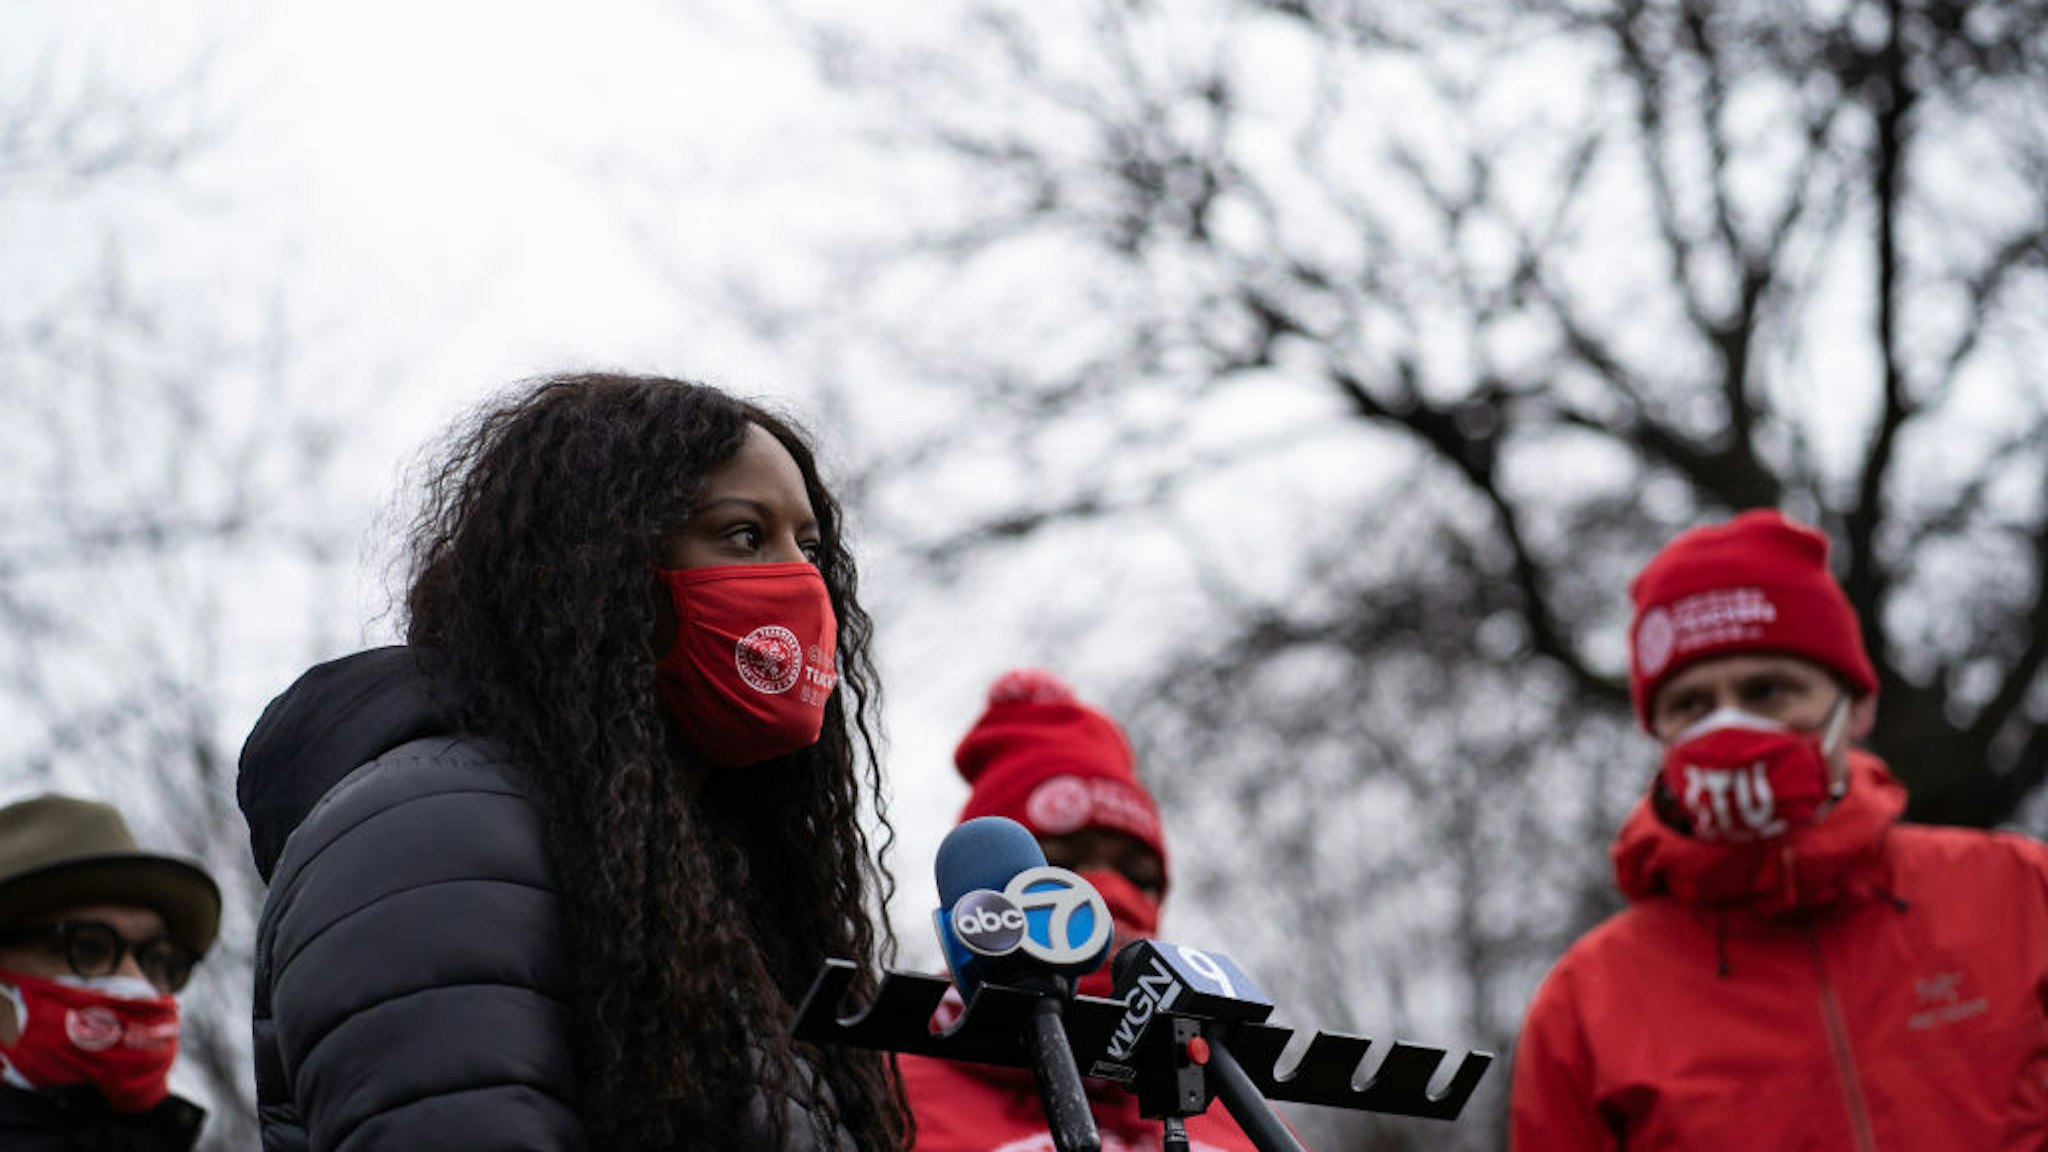 Chicago Teachers Union Vice President Stacy Davis Gates speaks ahead of a car caravan where teachers and supporters gathered to demand a safe and equitable return to in-person learning during the COVID-19 pandemic in Chicago on December 12, 2020. Select Chicago public schools teachers are expected to return to classrooms on January 4th, 2021. (Photo by Max Herman/NurPhoto via Getty Images)